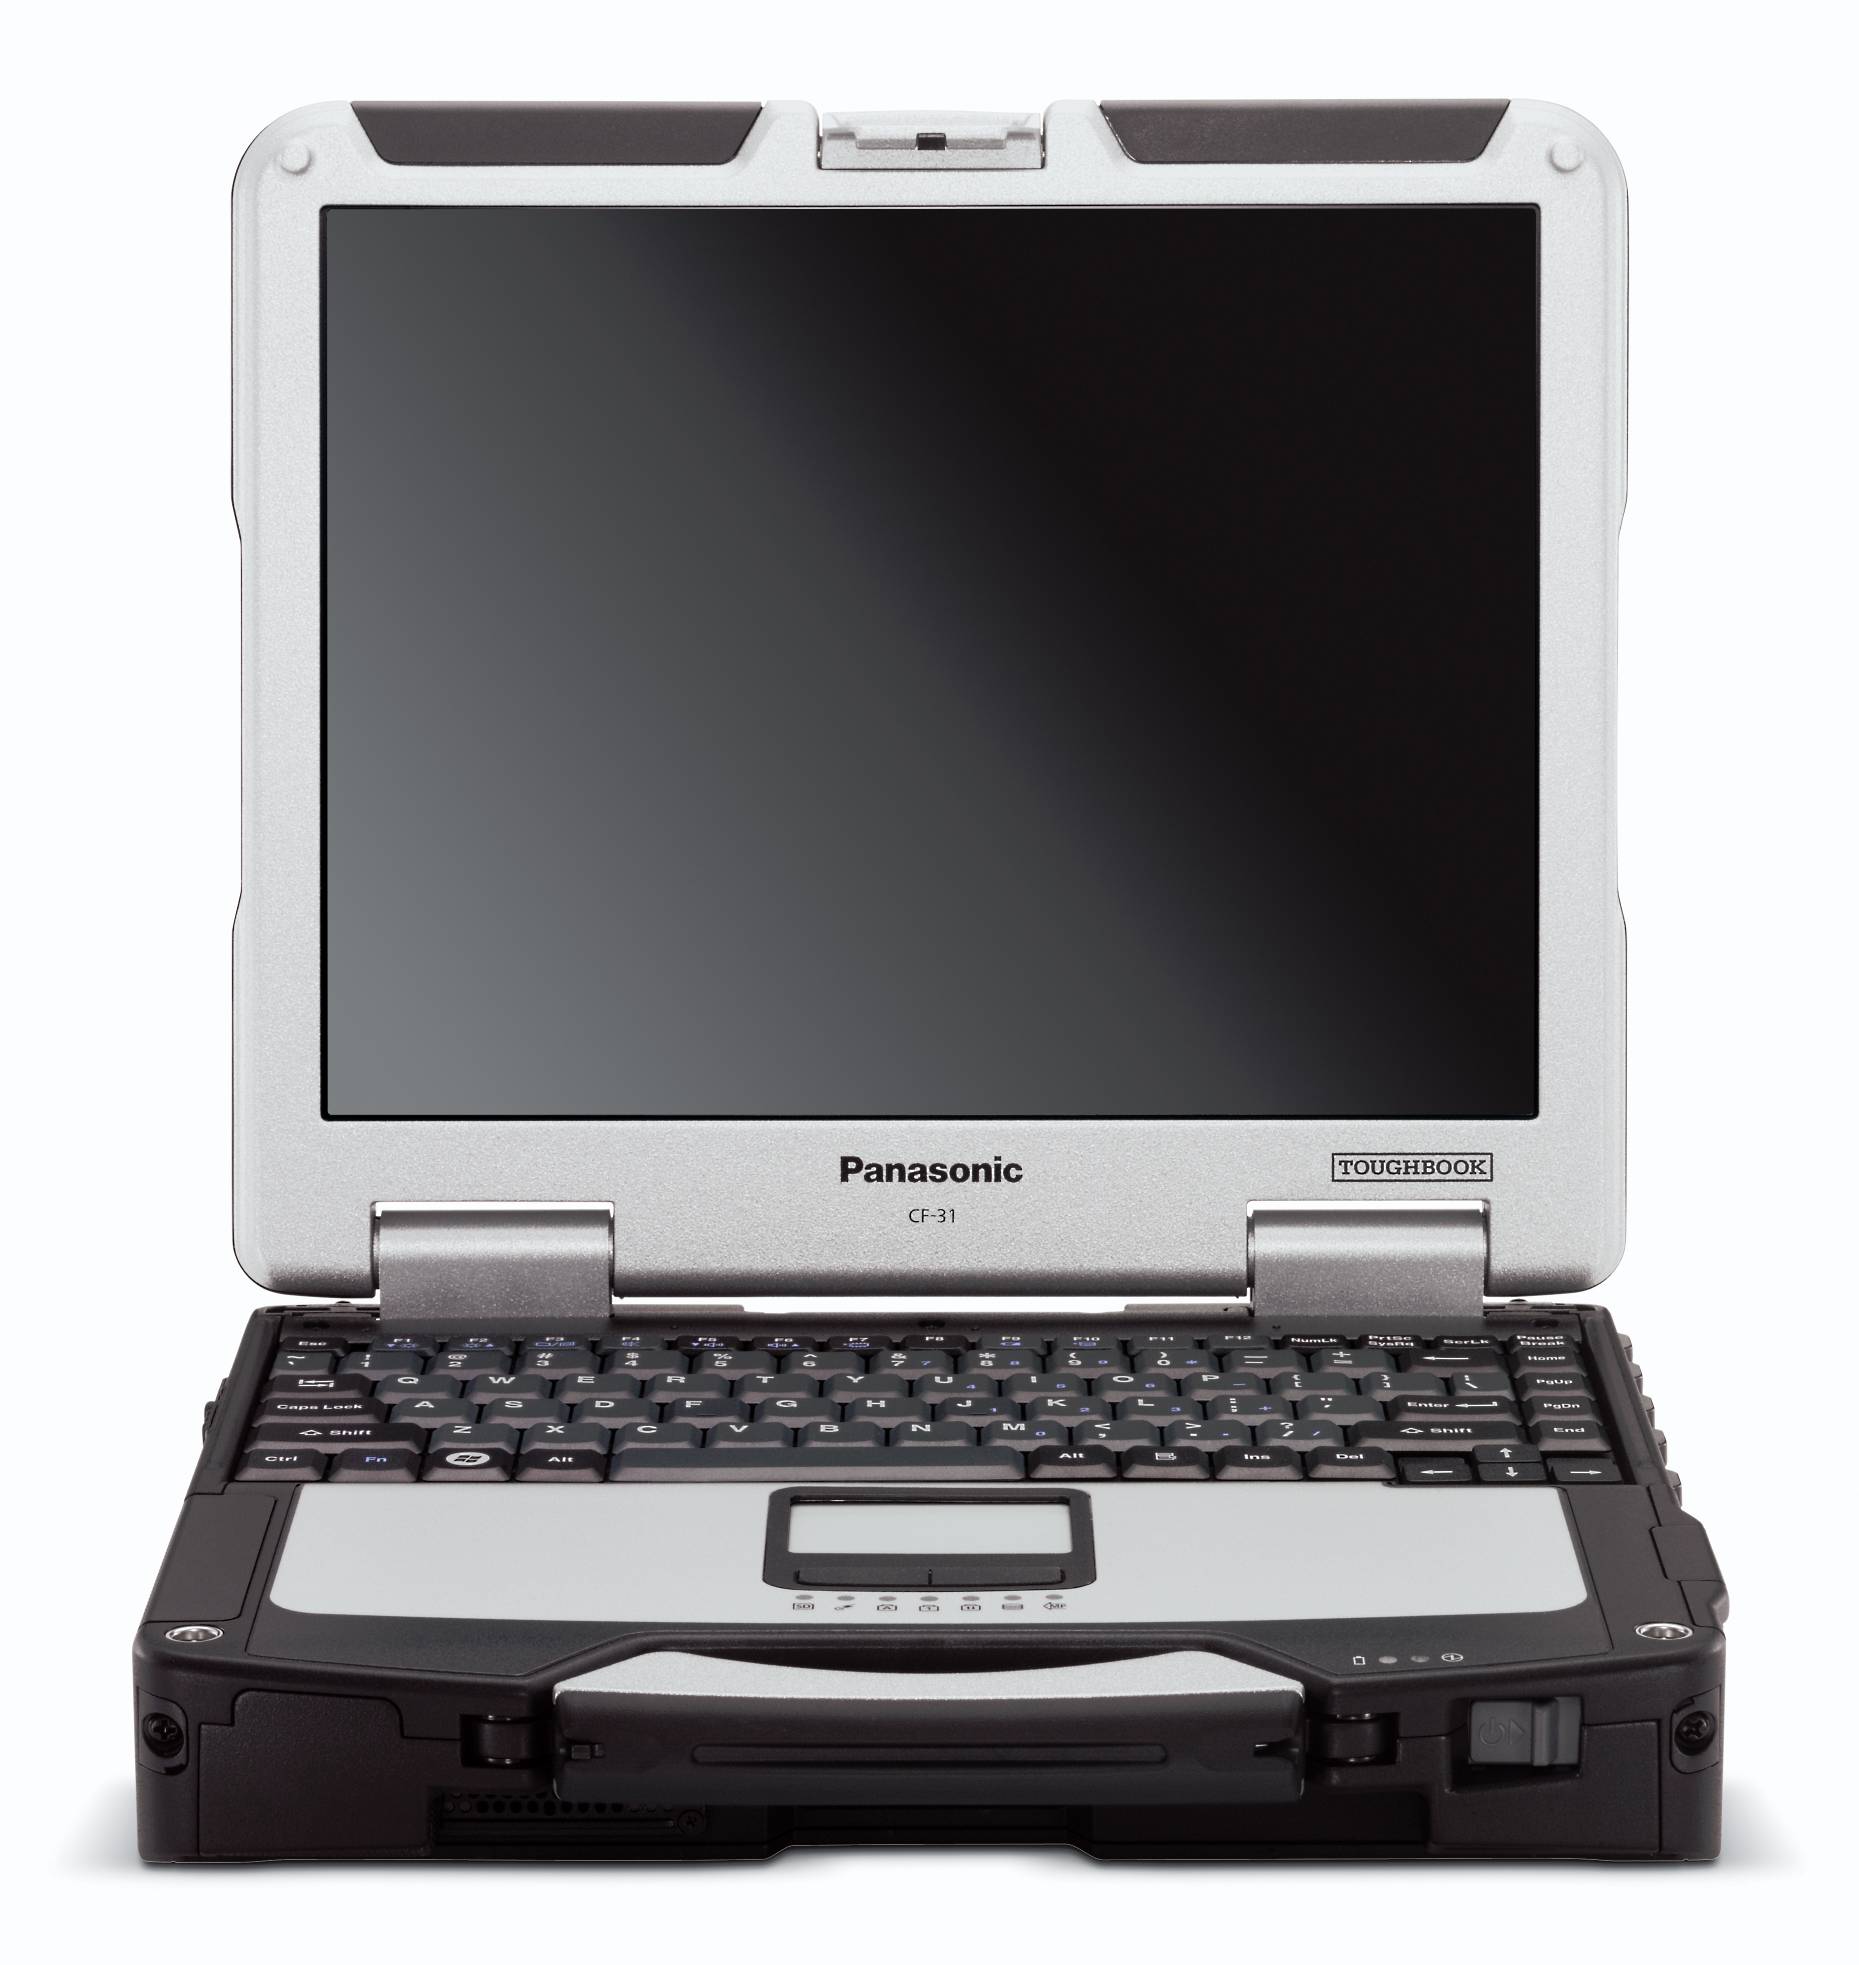 Used Panasonic A Grade CF-31 Toughbook 13.1-inch (XGA sunlight-viewable LED 1024 x 768) 2.1GHz Core i3 160GB HD 4 GB Memory Digitizer Pen Win 7 Pro OS Power Adapter Included - image 1 of 2